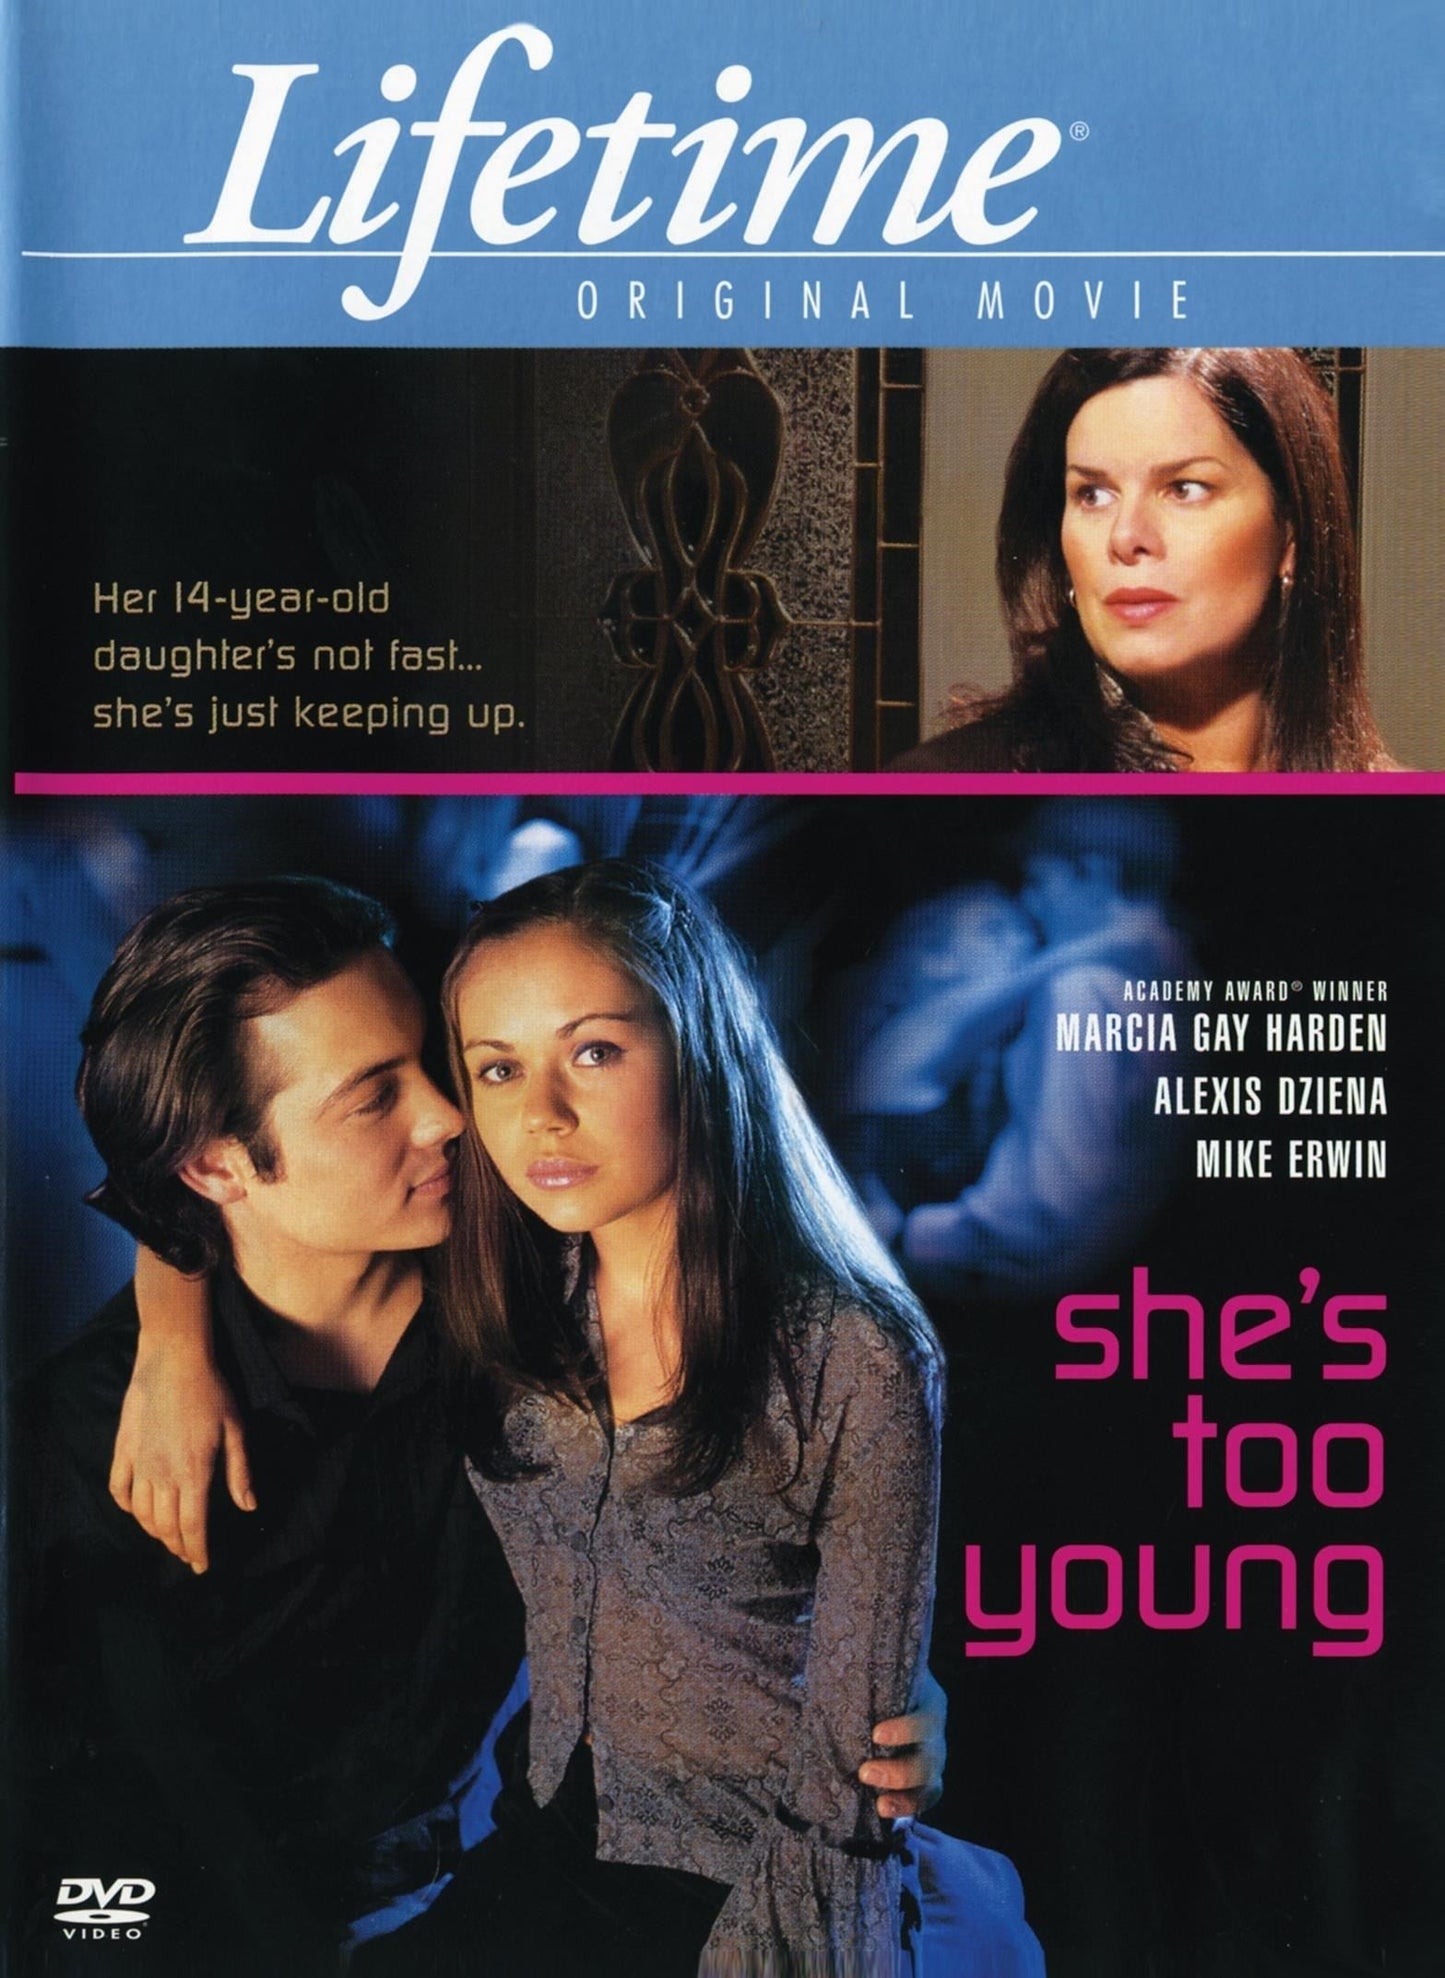 She's Too Young rareandcollectibledvds